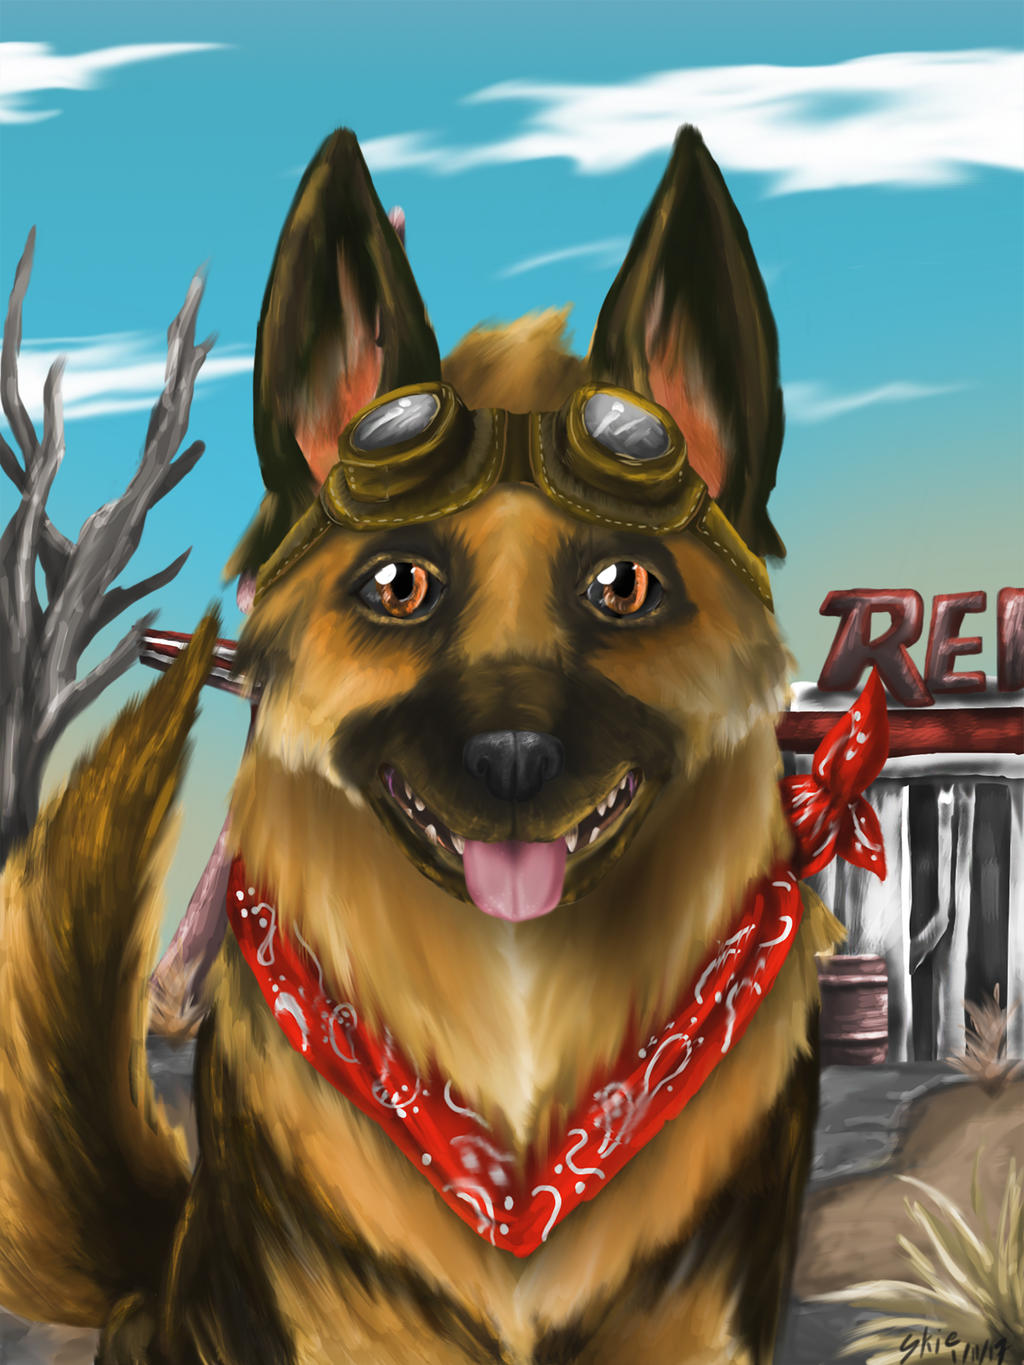 Dogmeat-Fallout 4 by xenomorphfury161 on DeviantArt